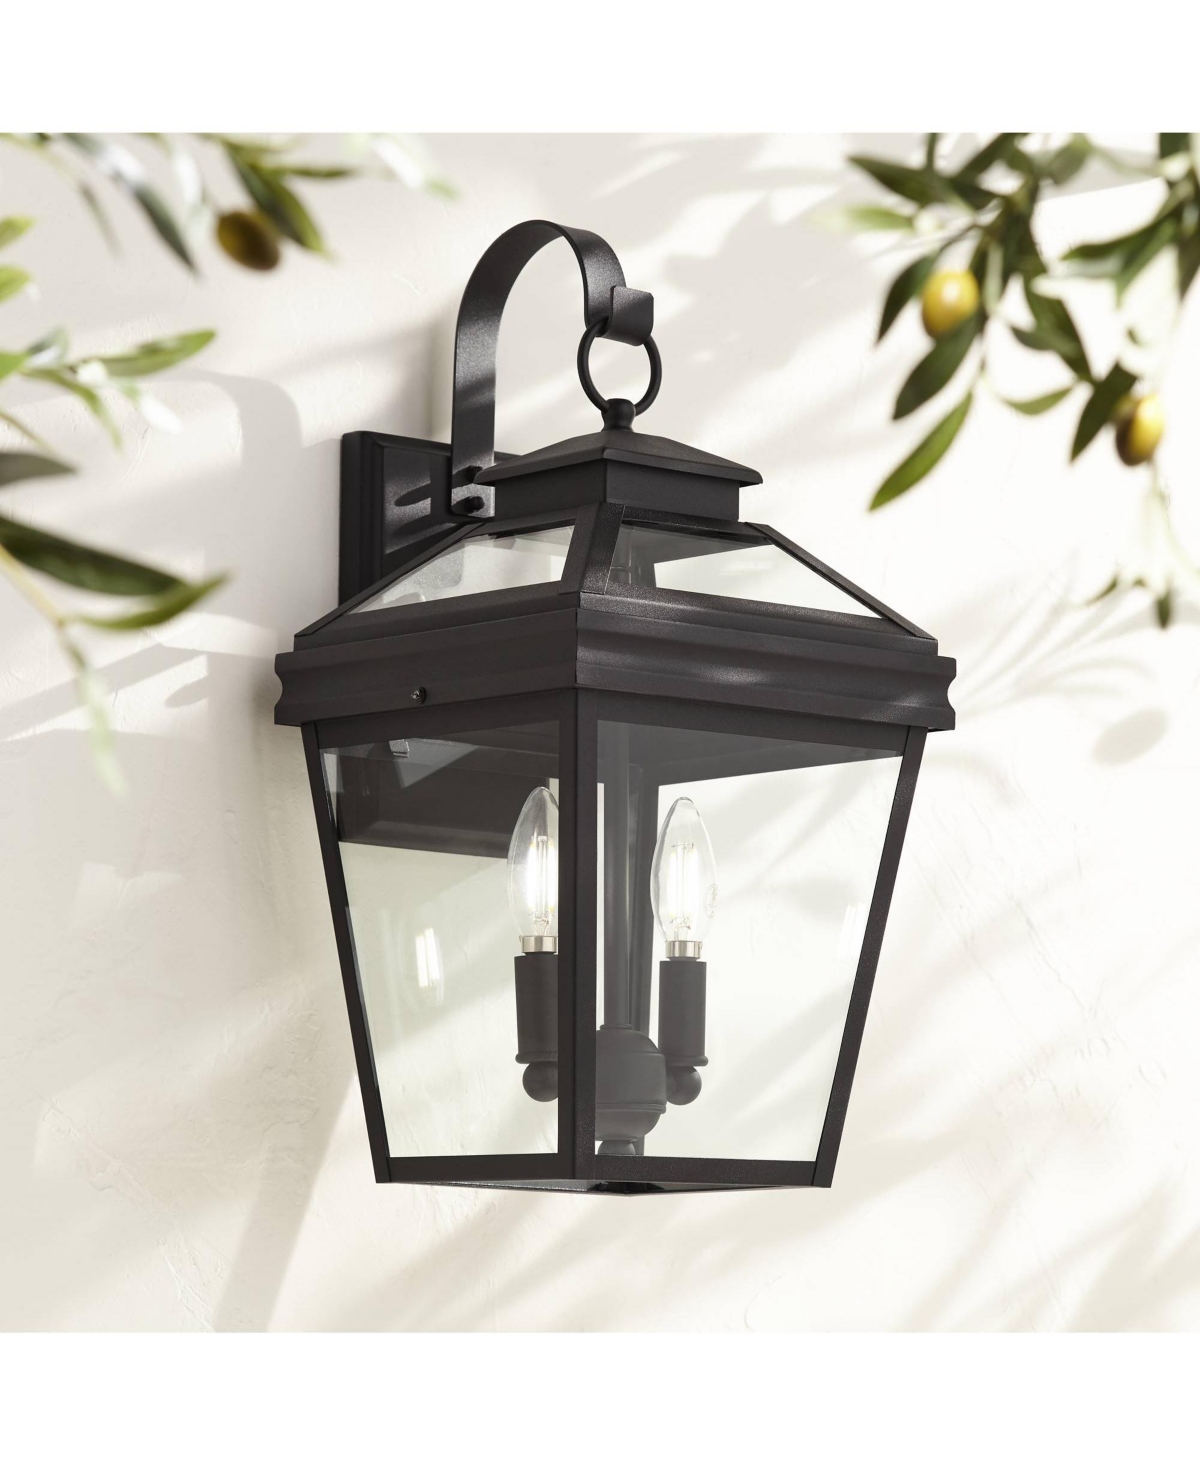 Stratton Street Traditional Outdoor Wall Light Textured Black Steel 16 1/2" Clear Glass Lantern for Exterior House Porch Patio Outside Deck Garage Yar